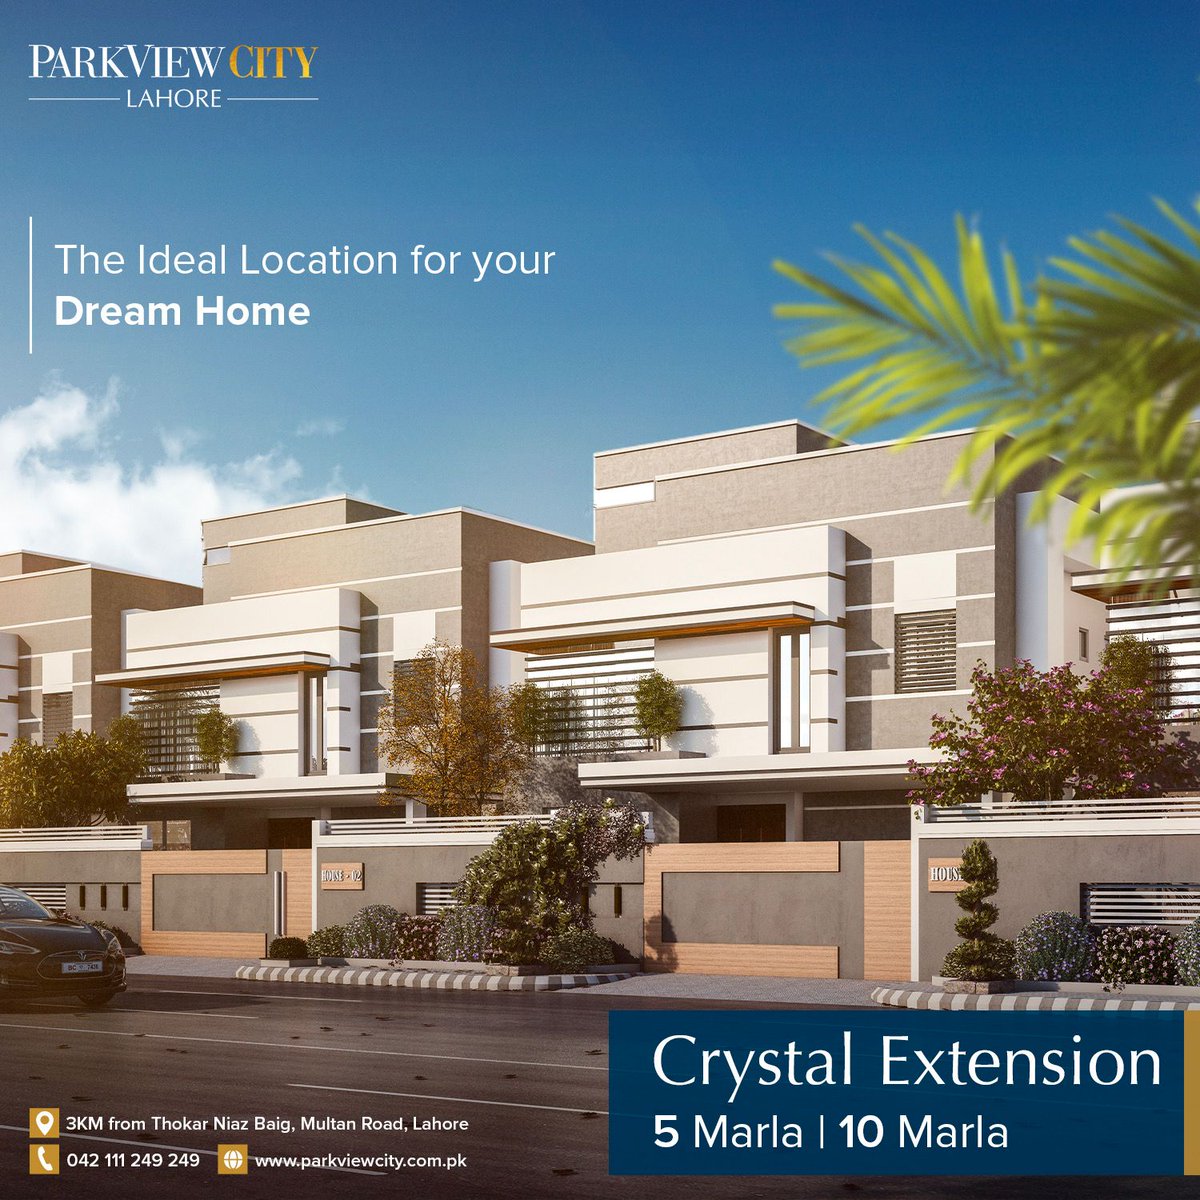 Crystal Extension is the ideal location where you and family can enjoy all the luxuries life has to offer in the most affordable of prices. ParkView City Lahore offers 5 Marla and 10 Marla ready for possession plots in Crystal Extension.

 #CrystalExtension #ResidentialPlots